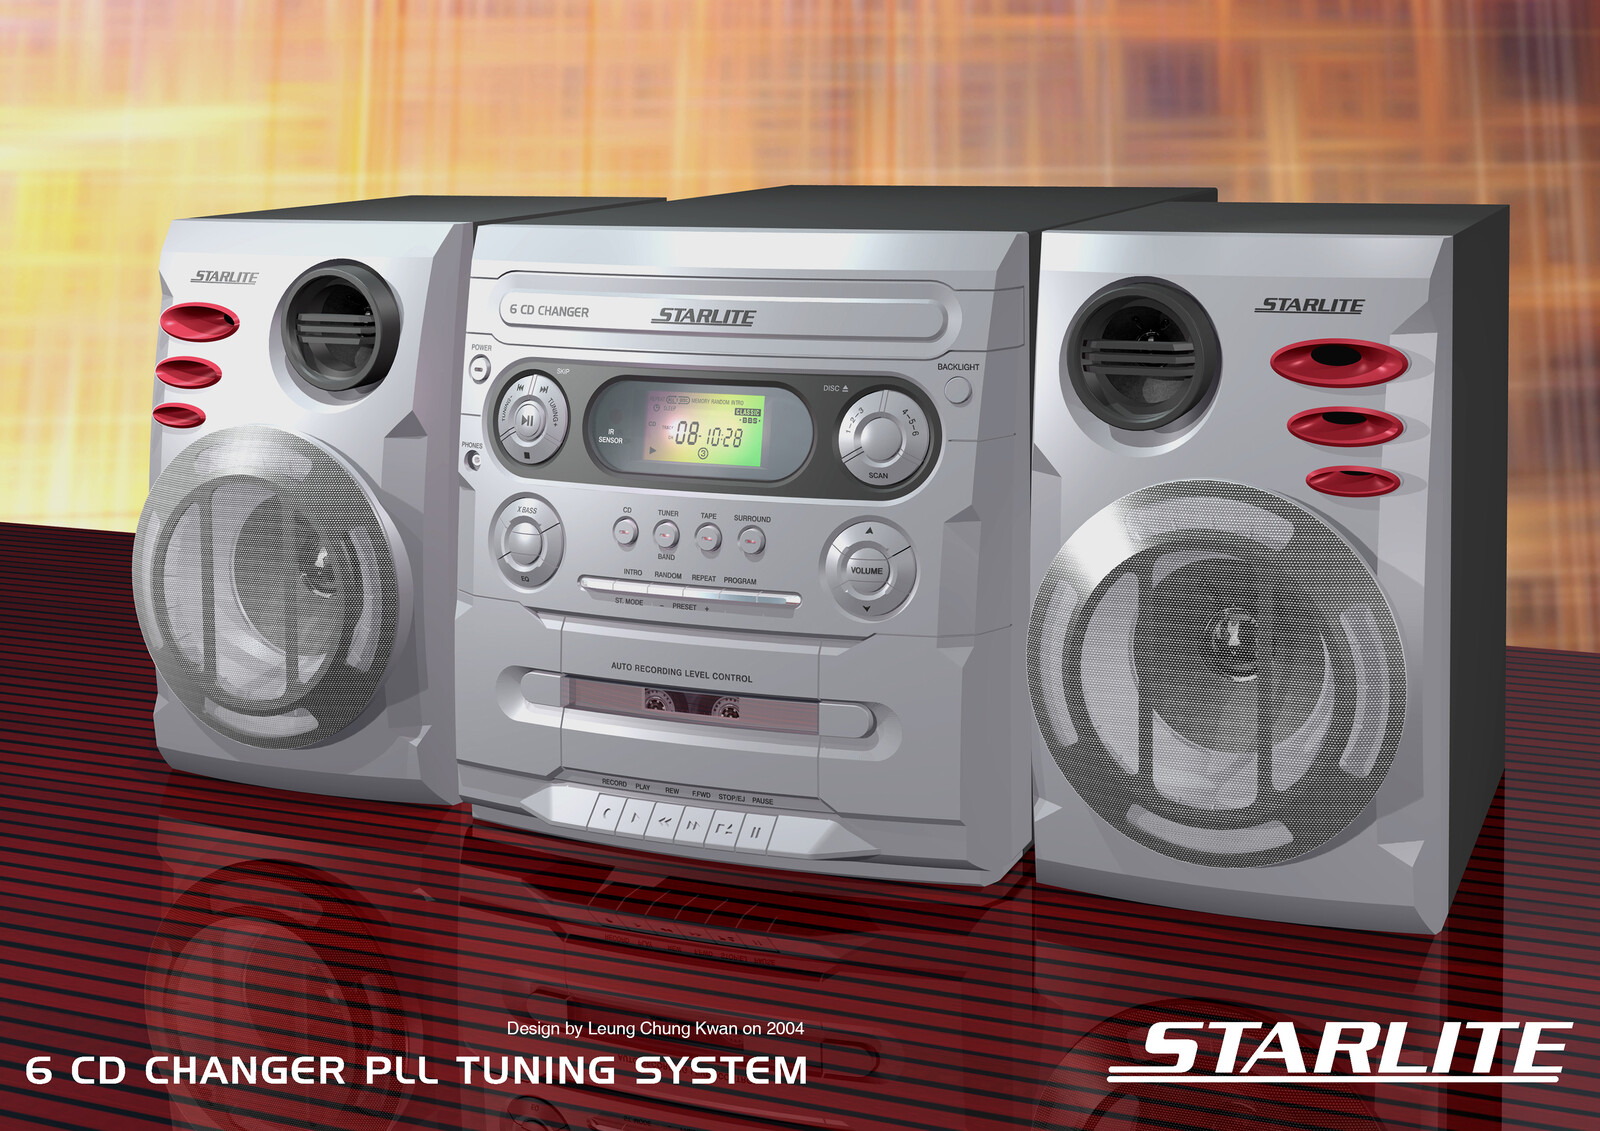 💎 6 CD Changer PLL Tuner with Single Cassette Hi-Fi | Design by Leung Chung Kwan on 2004 💎
Brand Name︰Starlite | Client︰Star Light Electronics Co., LTD.
Other Views︰http://bit.ly/sl02e-6cd-pll-single